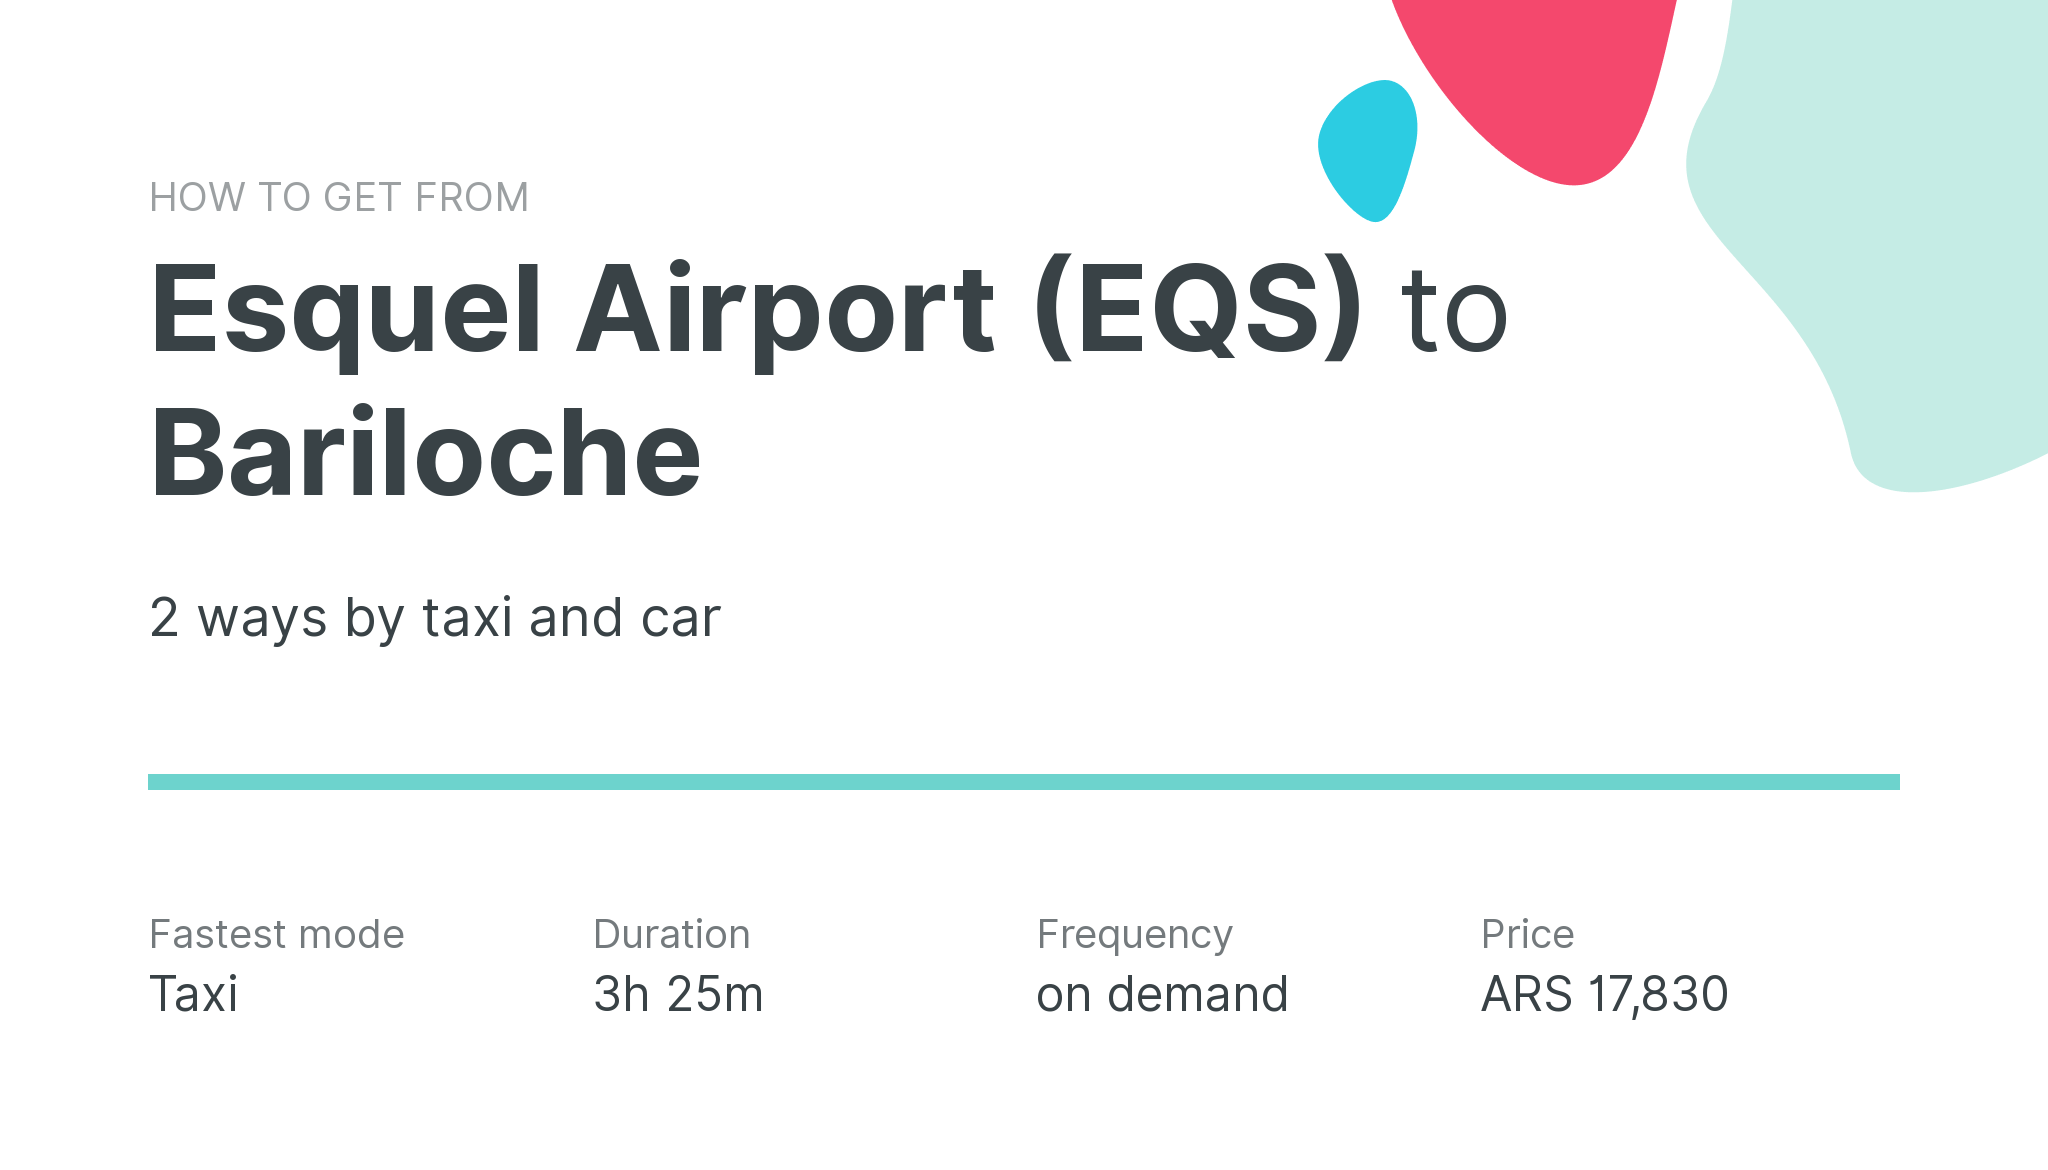 How do I get from Esquel Airport (EQS) to Bariloche